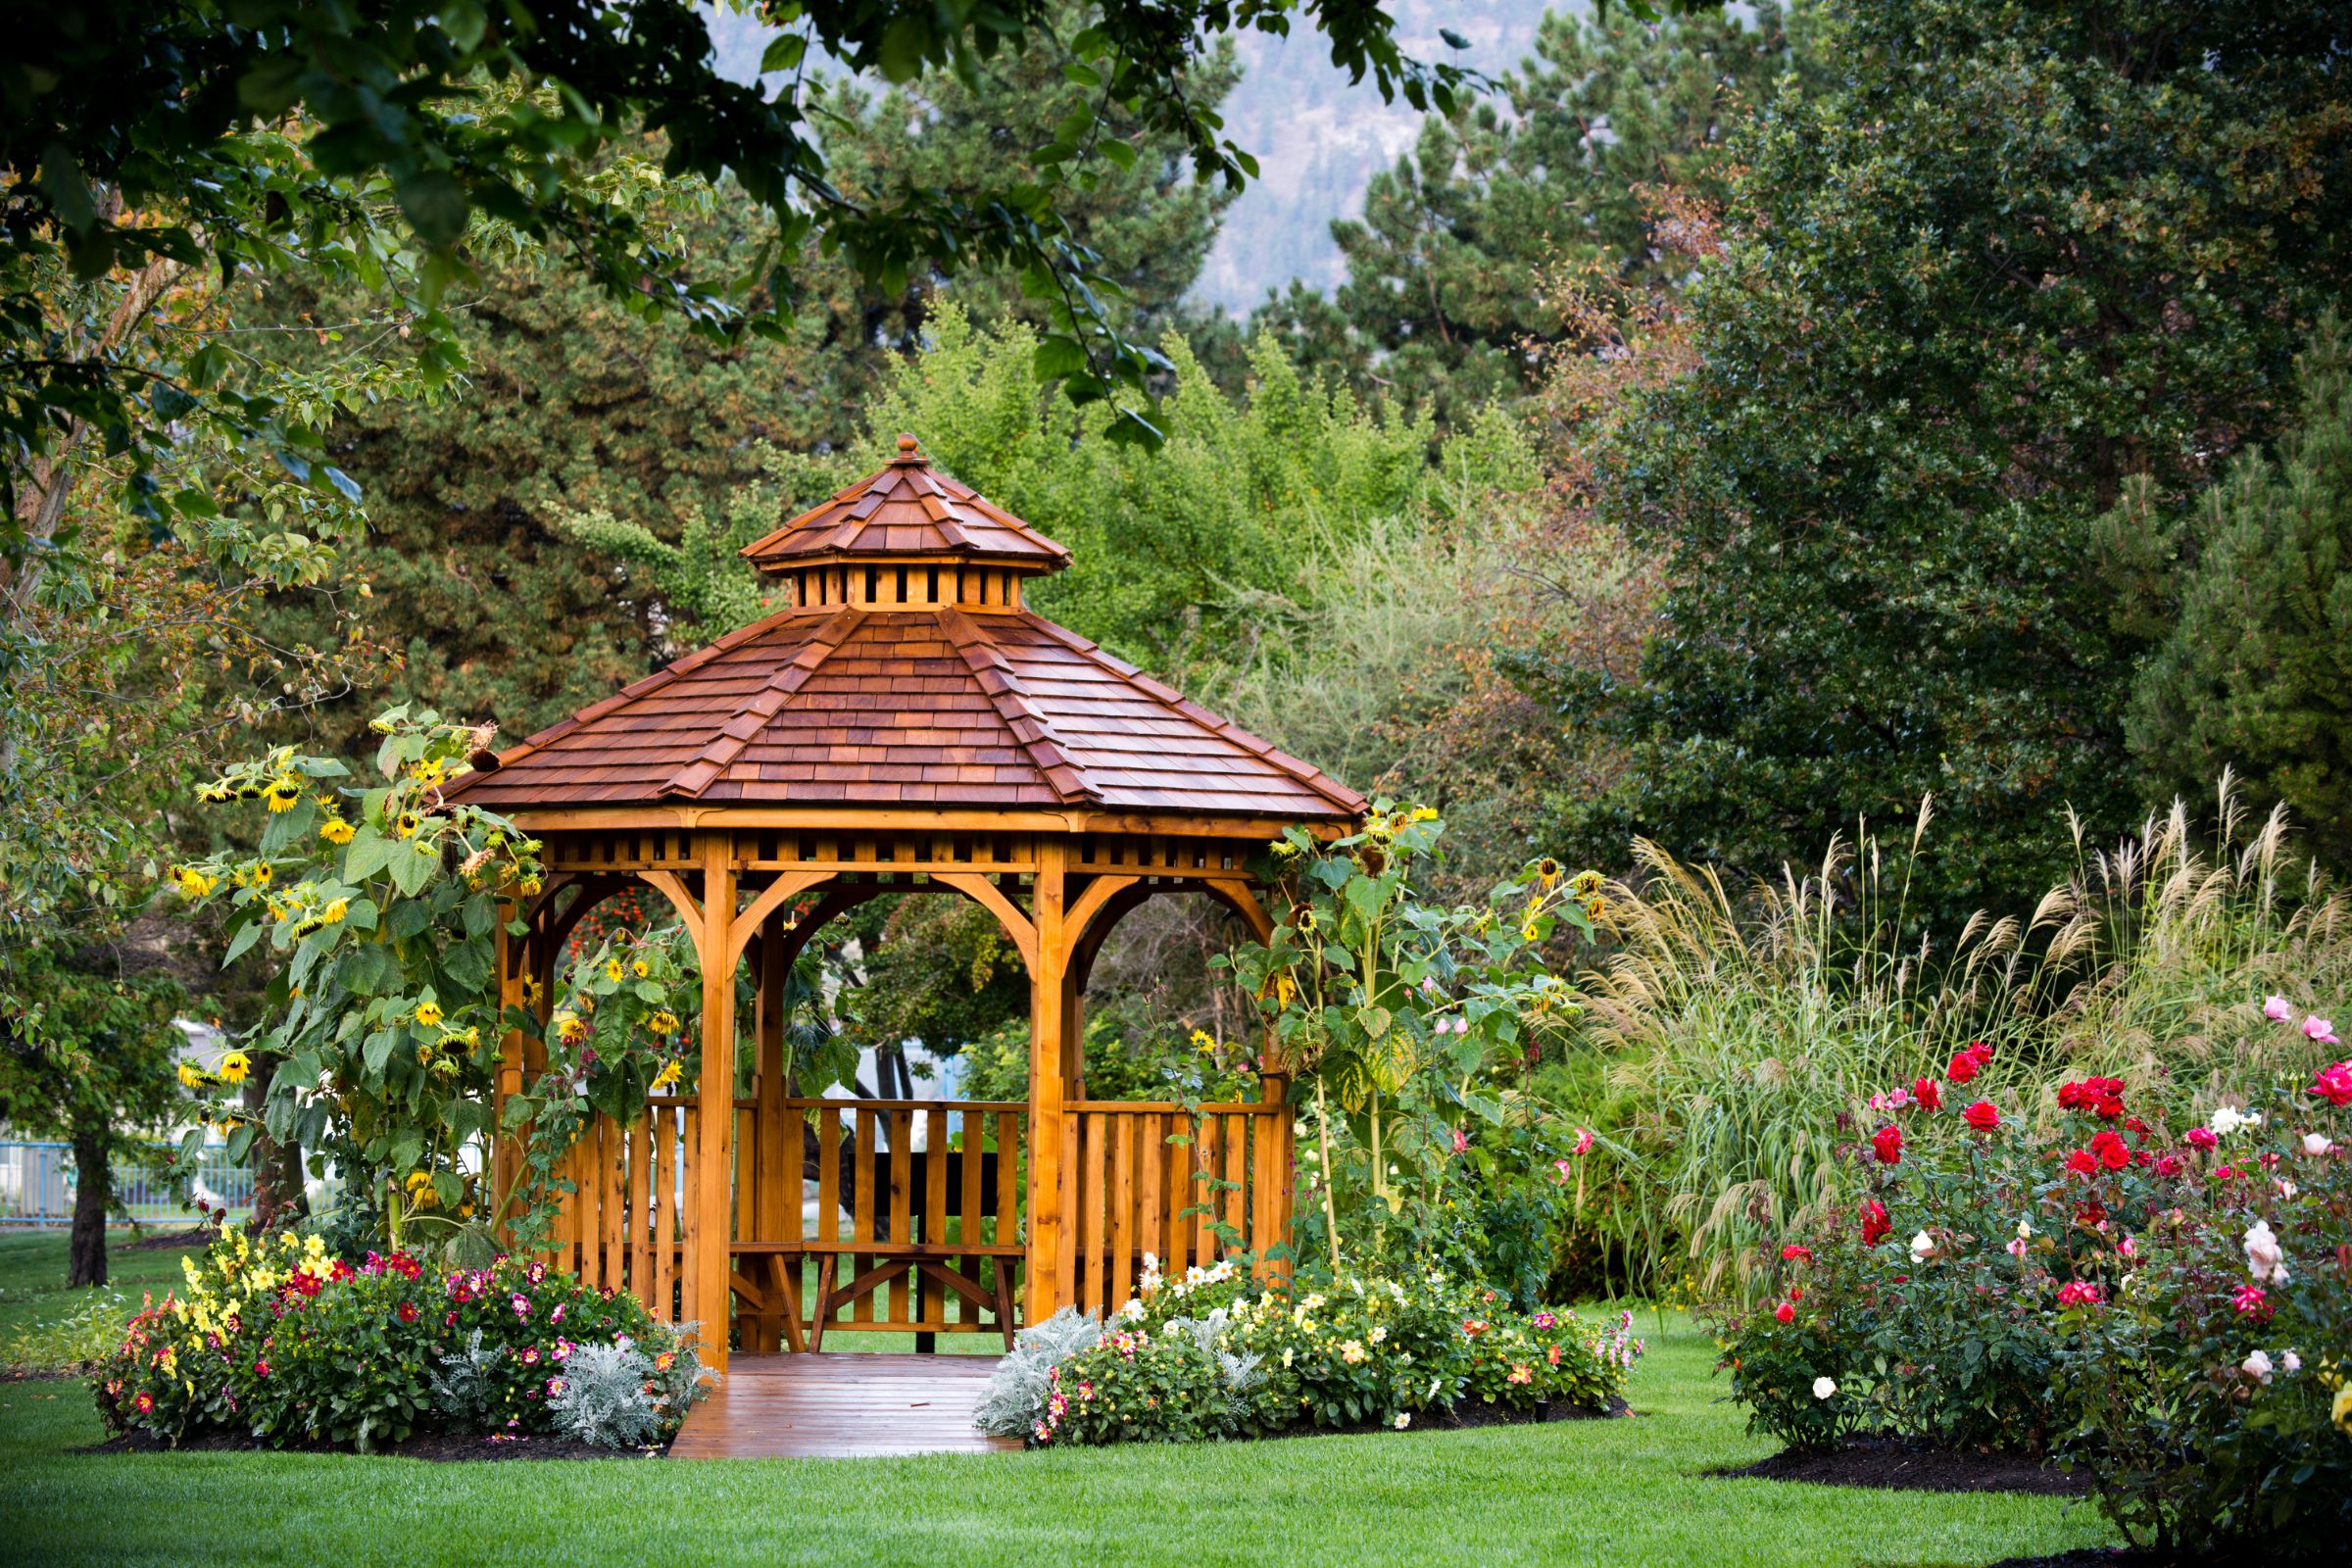 Benefits of Adding a Pavilion to Your Backyard